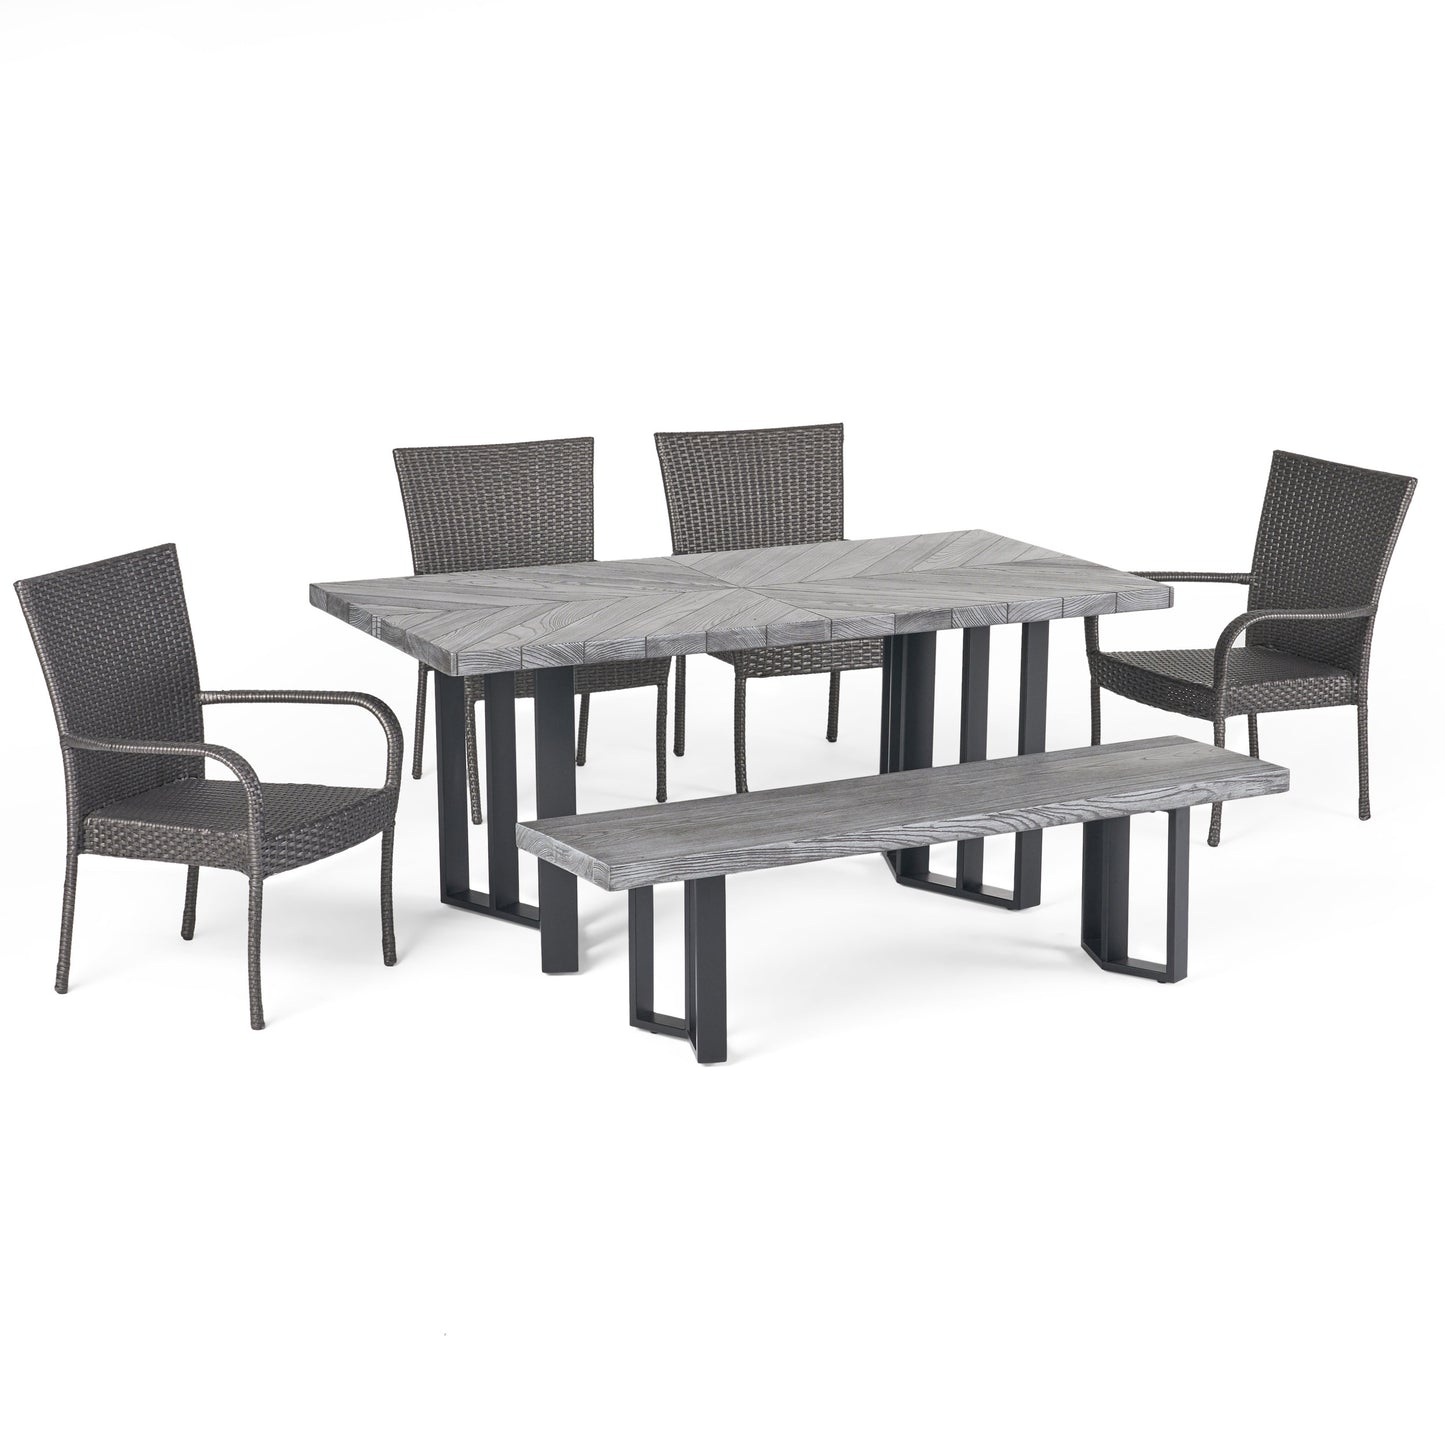 Fiona Outdoor 6 Piece Wicker Dining Set with Concrete Dining Table and Bench